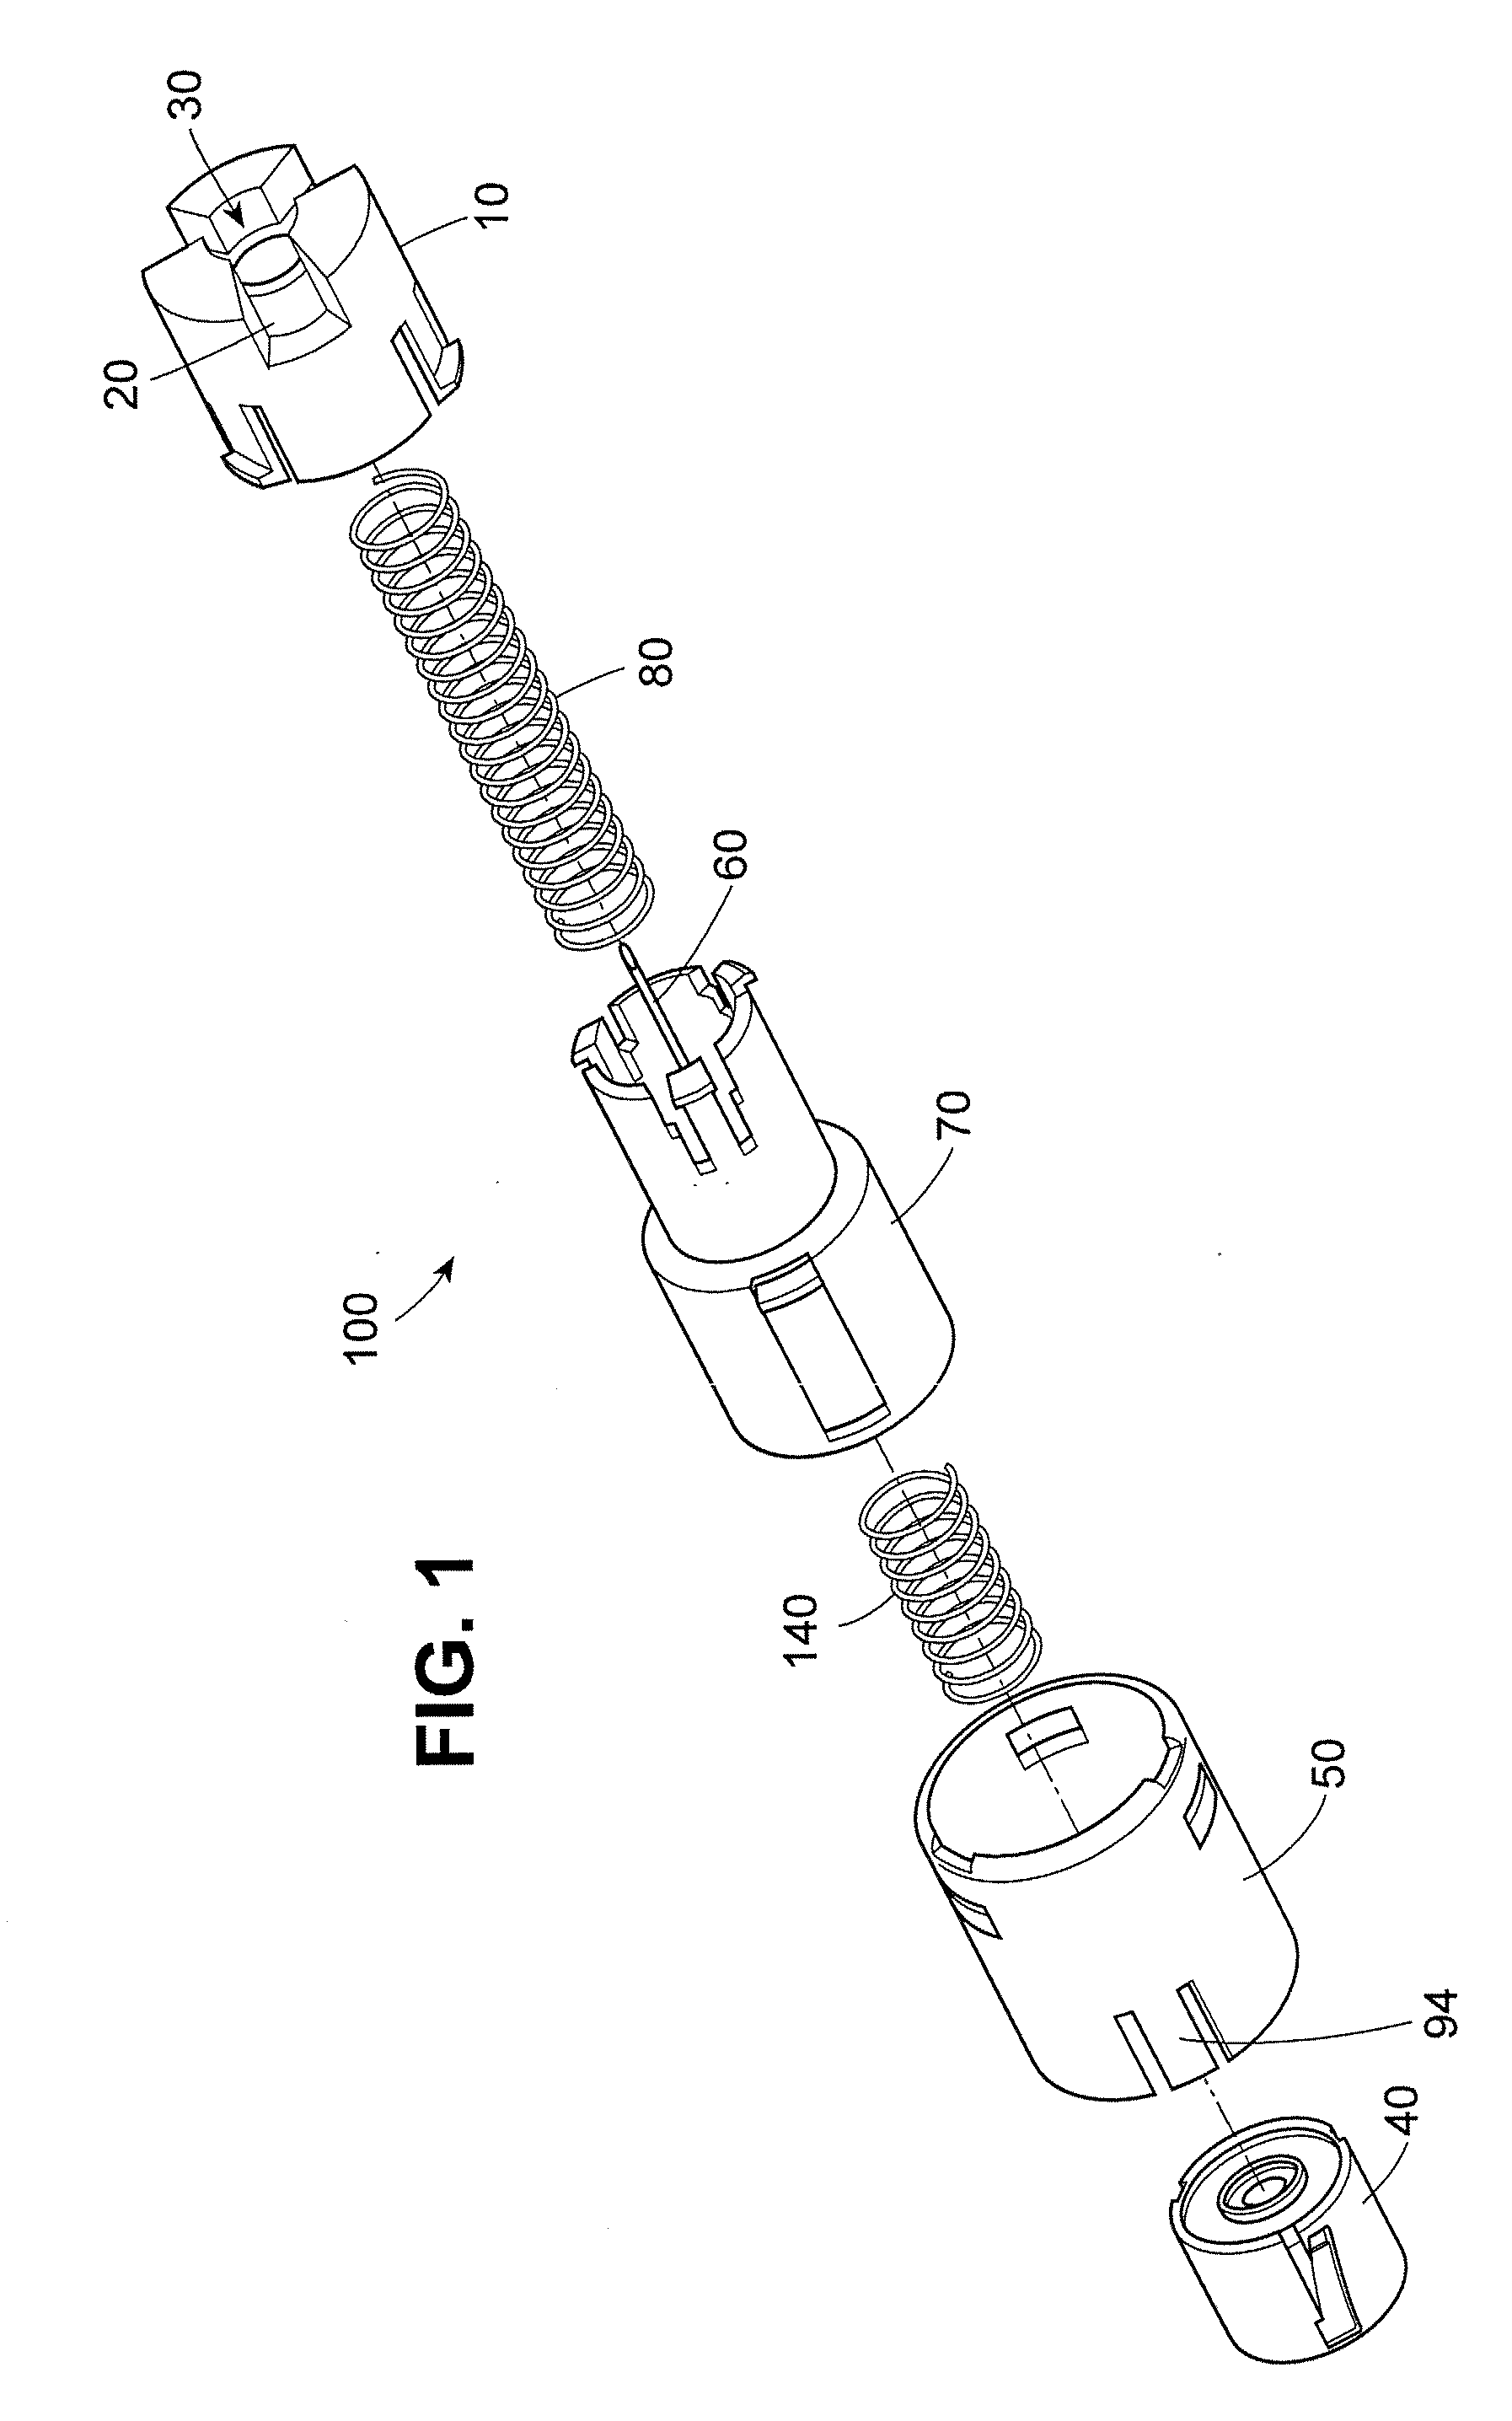 Safety pen needle with passive safety shield system